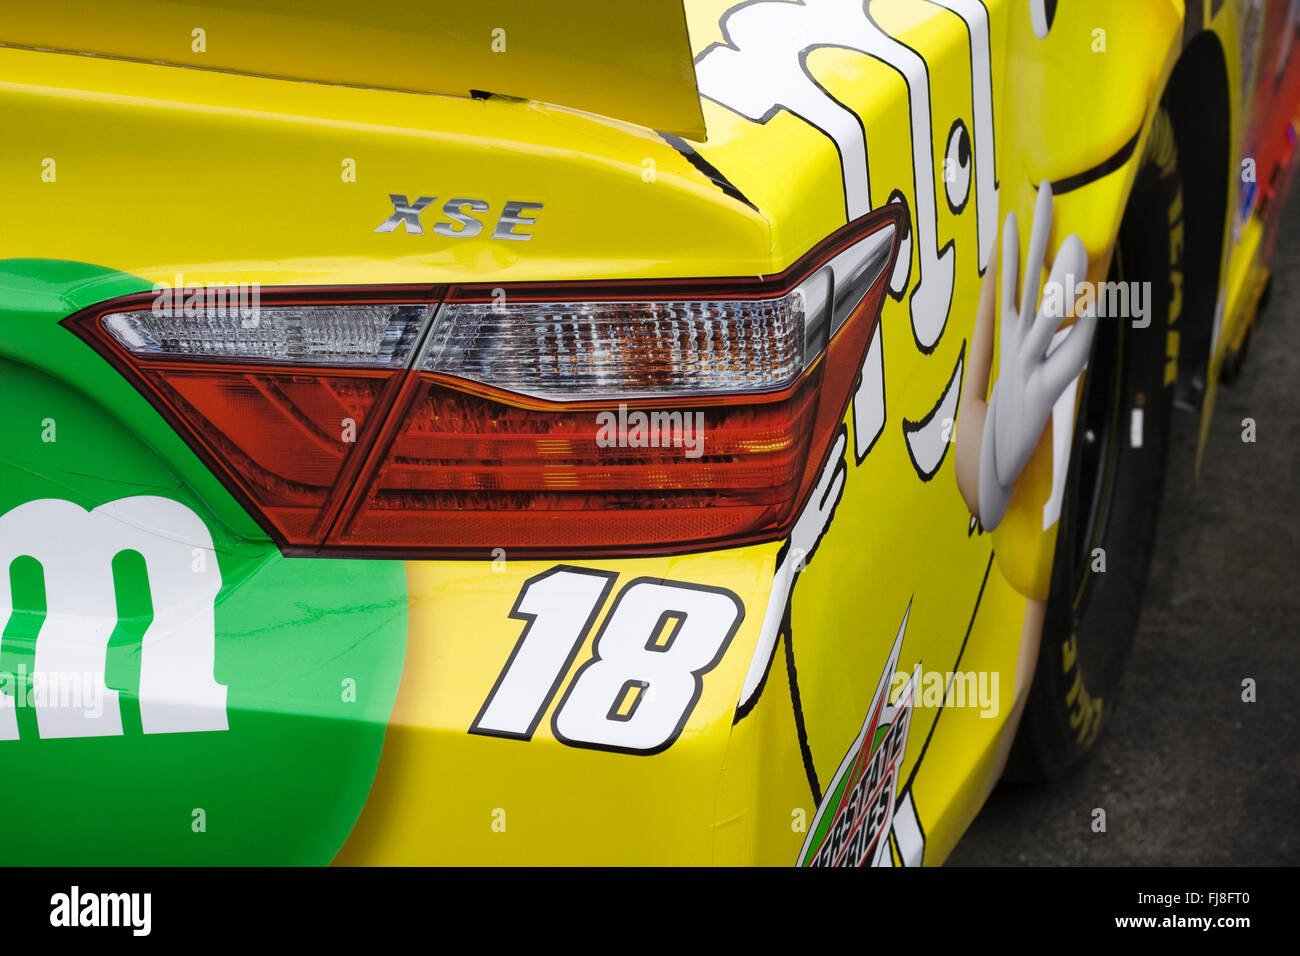 Right Rear Quarterpanel and tail light decal on the back of Kyle Busch's #18 NASCAR Stock Car Racecar. Stock Photo